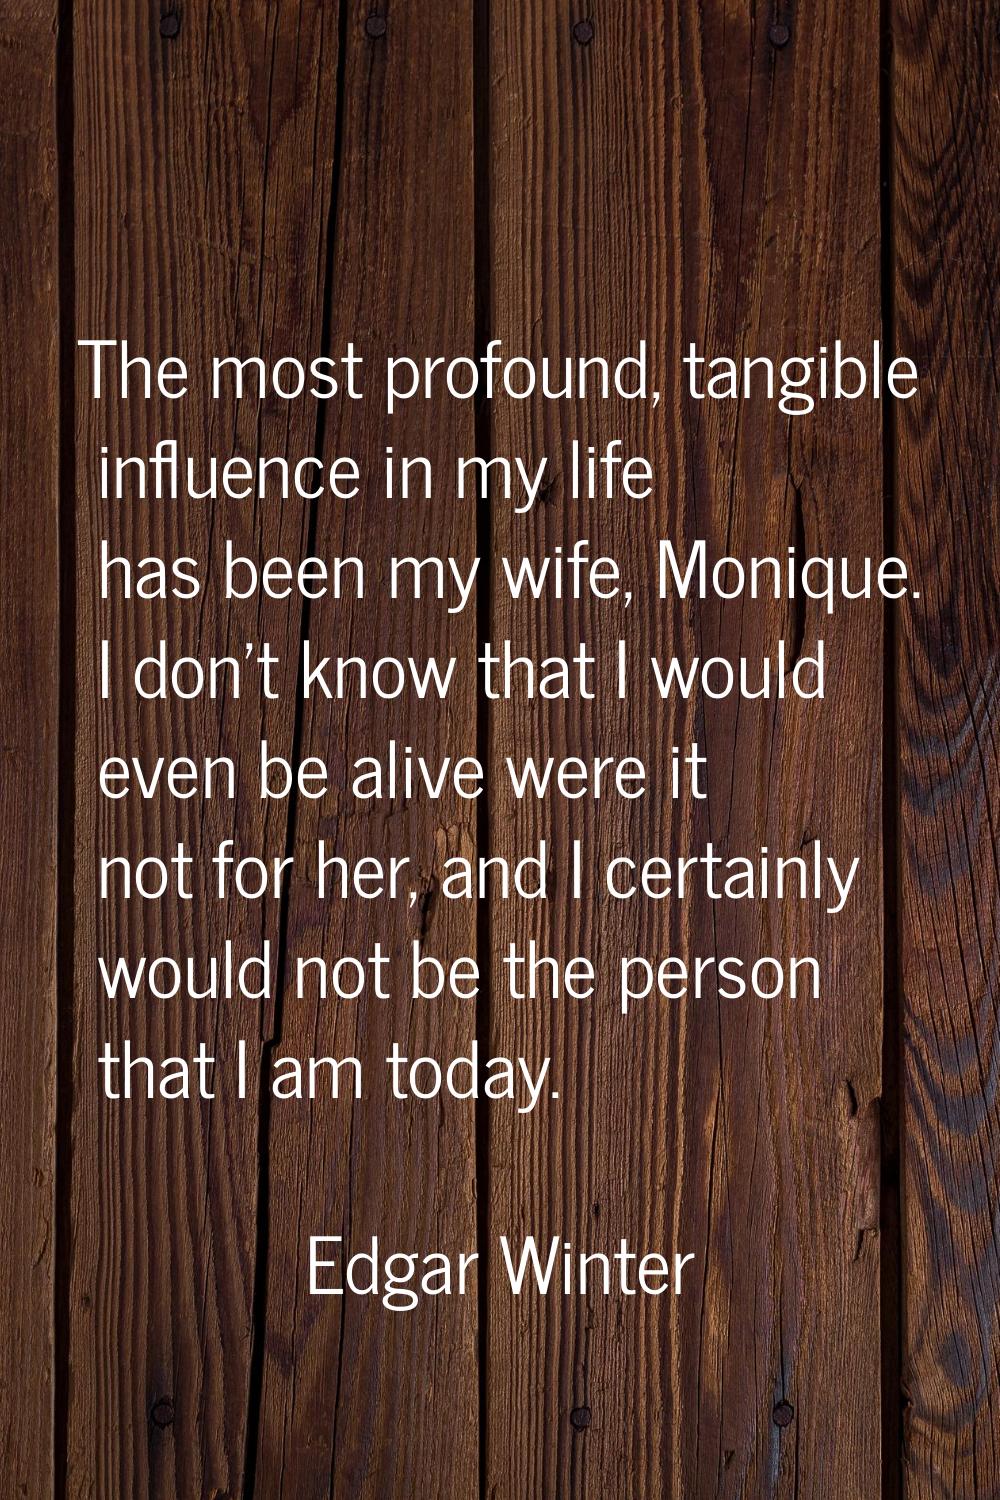 The most profound, tangible influence in my life has been my wife, Monique. I don't know that I wou